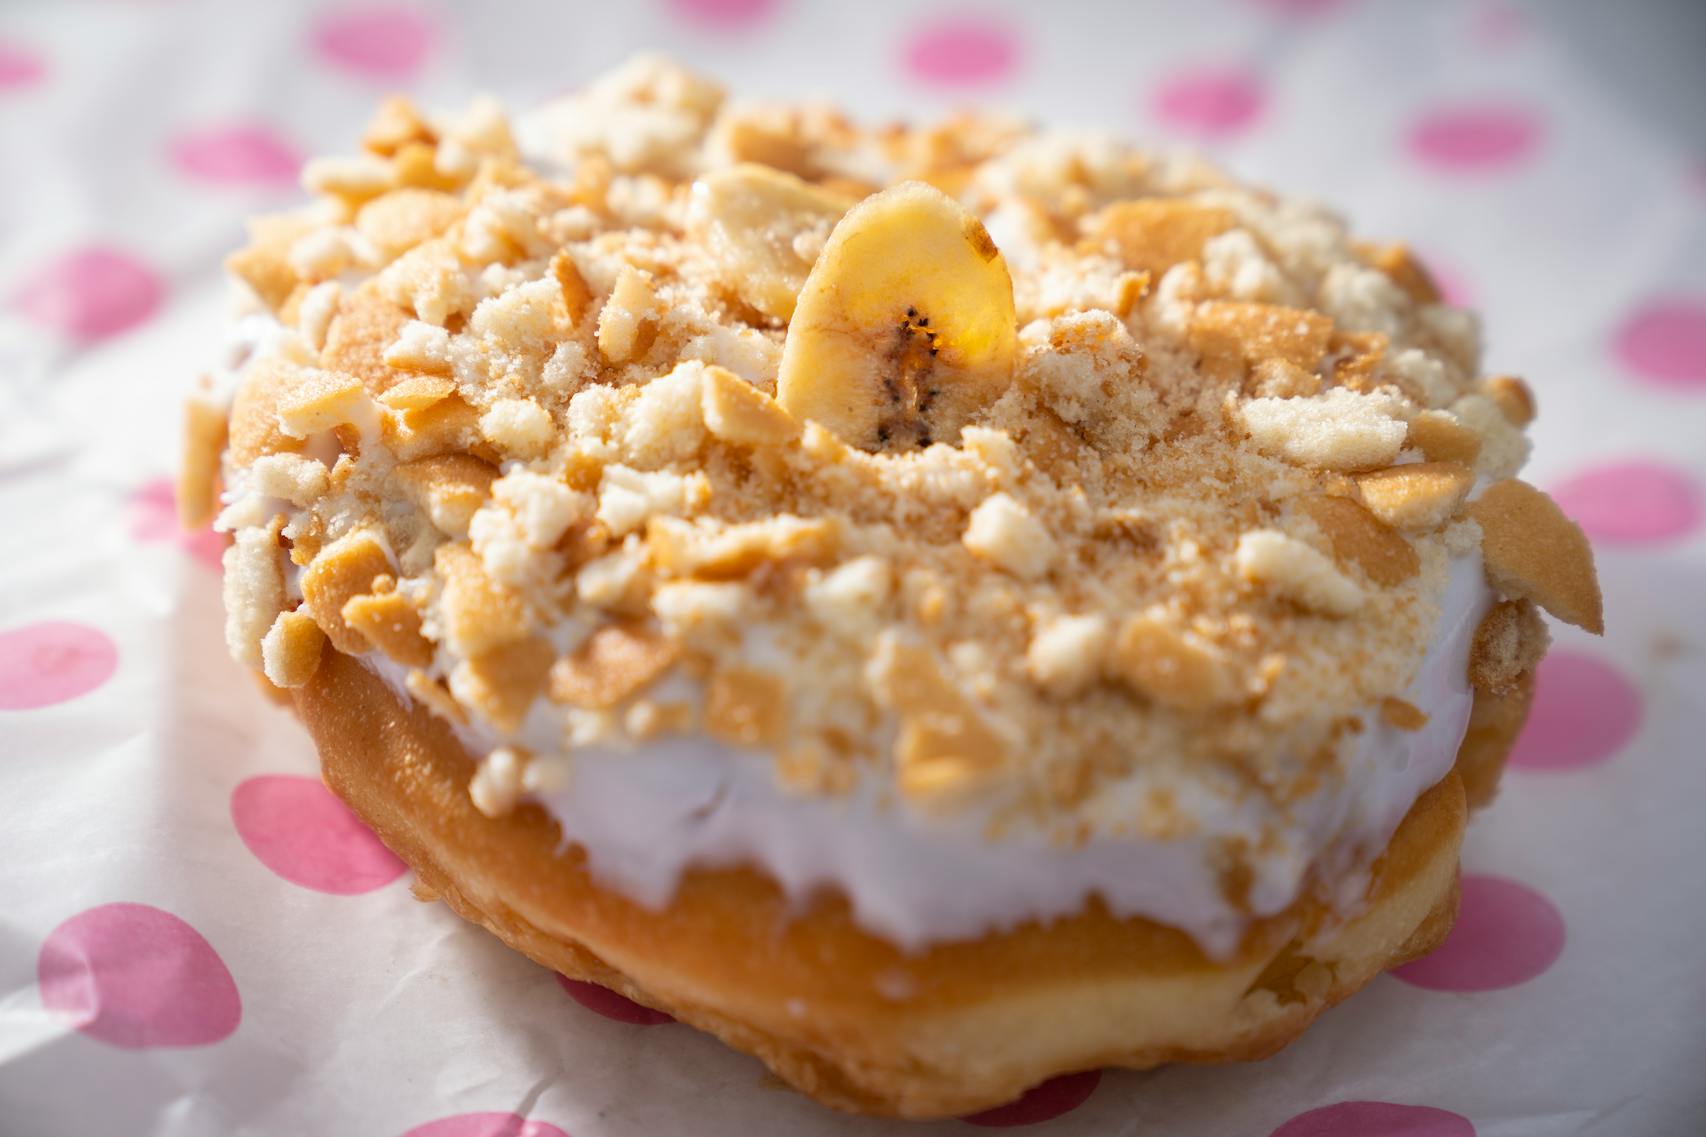 Banana Cream Pie Donut from Fluffy’s Hand-Cut Donuts. The new foods of the 2023 Minnesota State Fair photographed on the first day of the fair in Falcon Heights, Minn. on Tuesday, Aug. 8, 2023. ] LEILA NAVIDI • leila.navidi@startribune.com